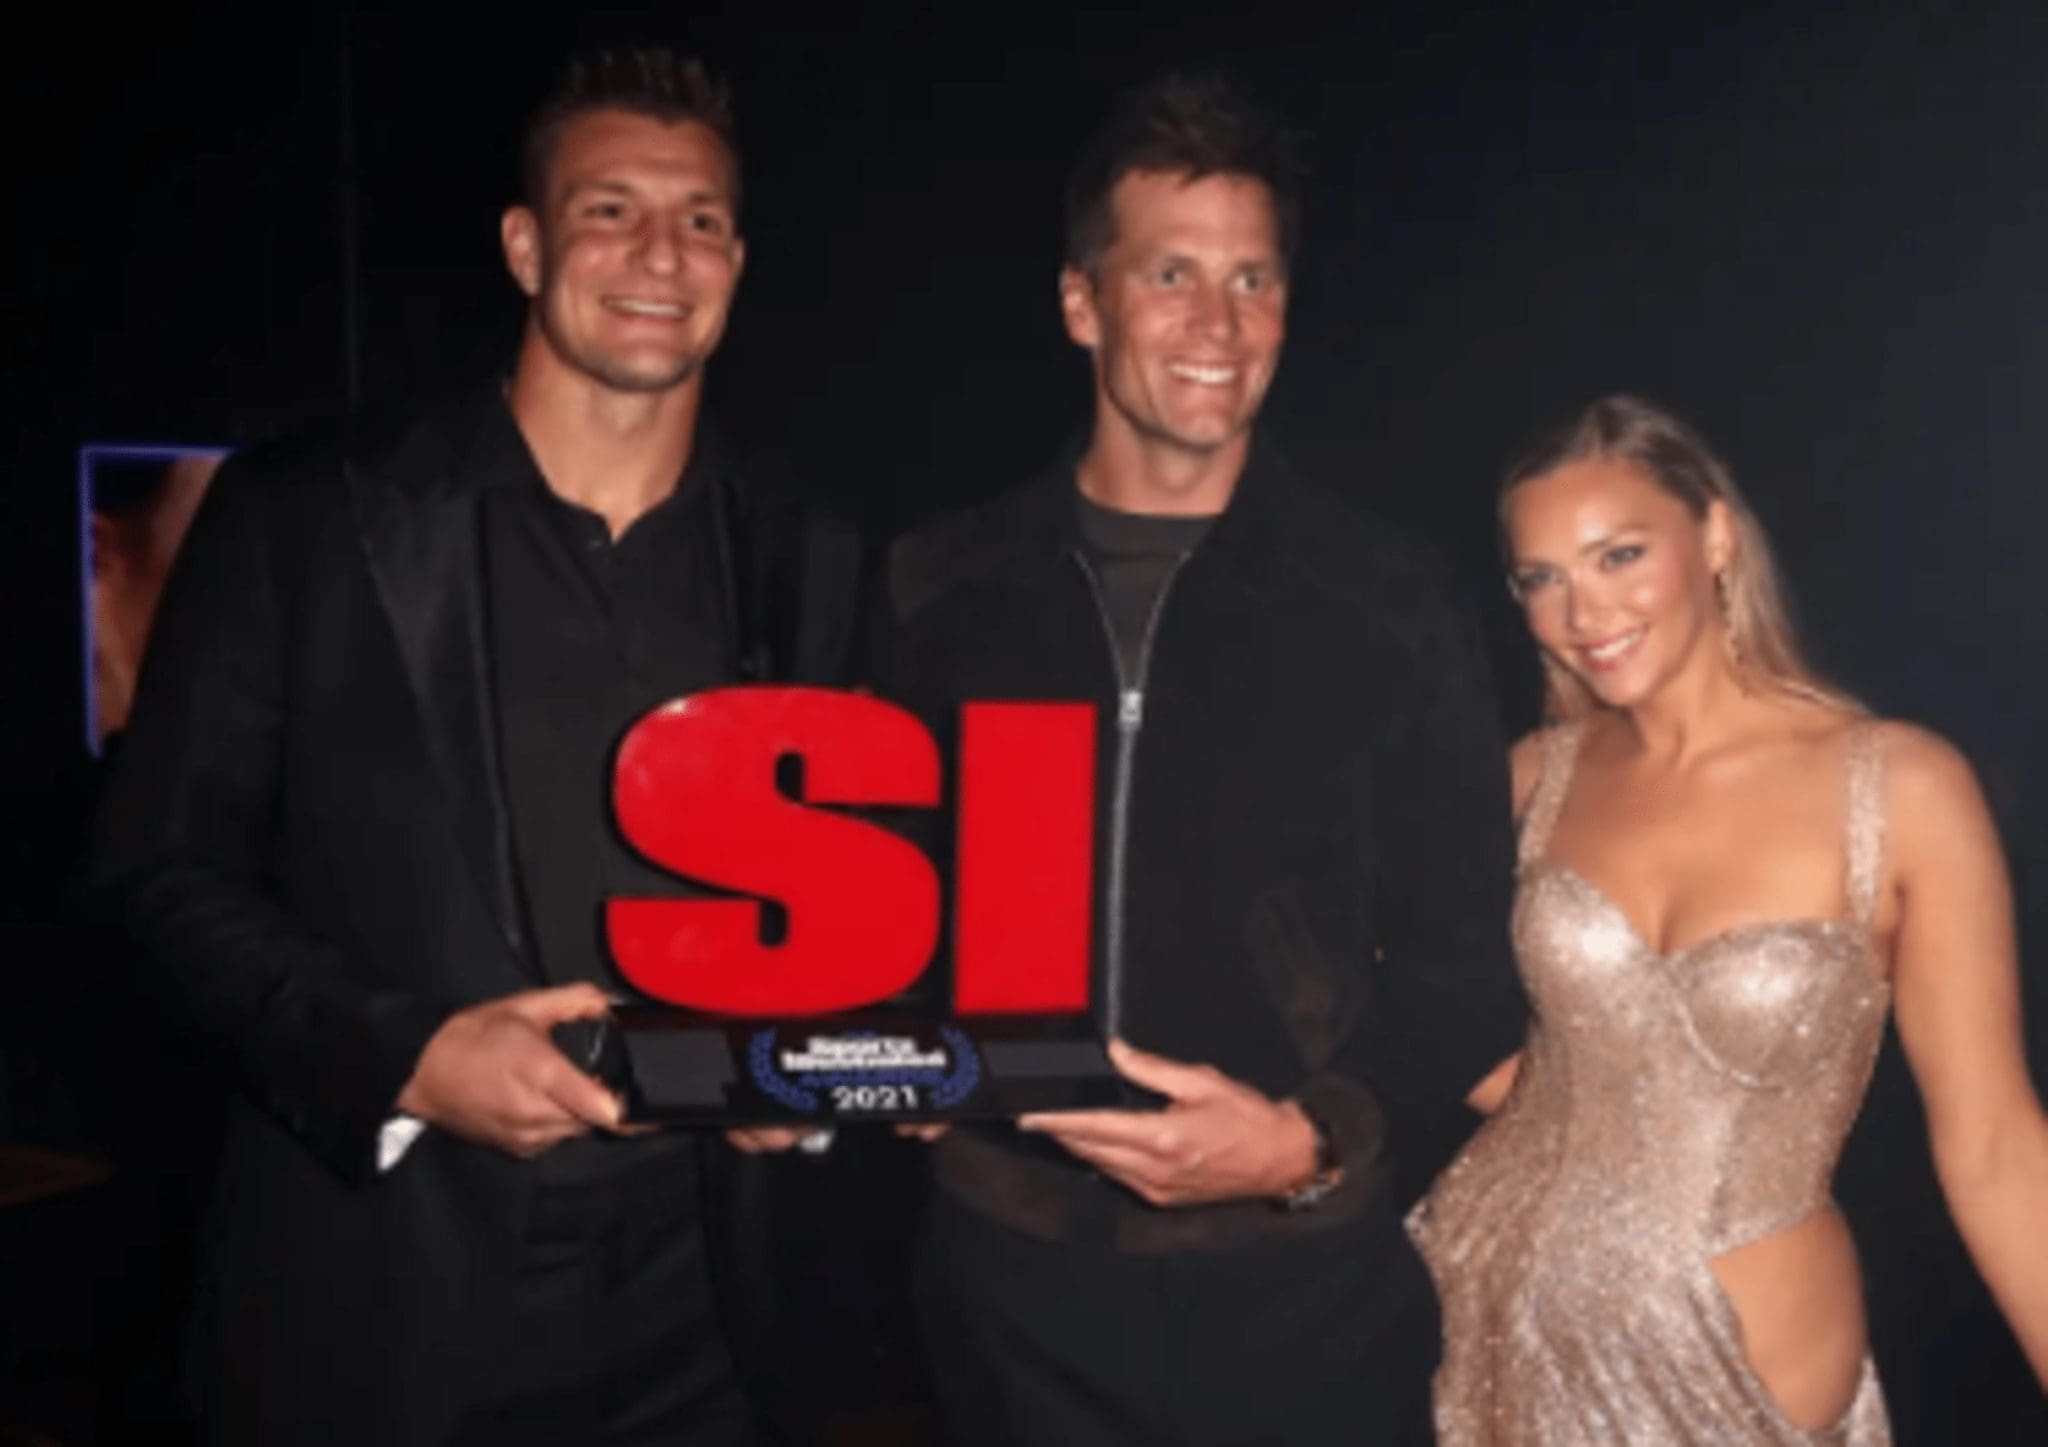 Camille Kostek, Girlfriend Of Rob Gronkowski, Commented On Tom Brady's Alleged Marital Problems With Gisele Bündchen